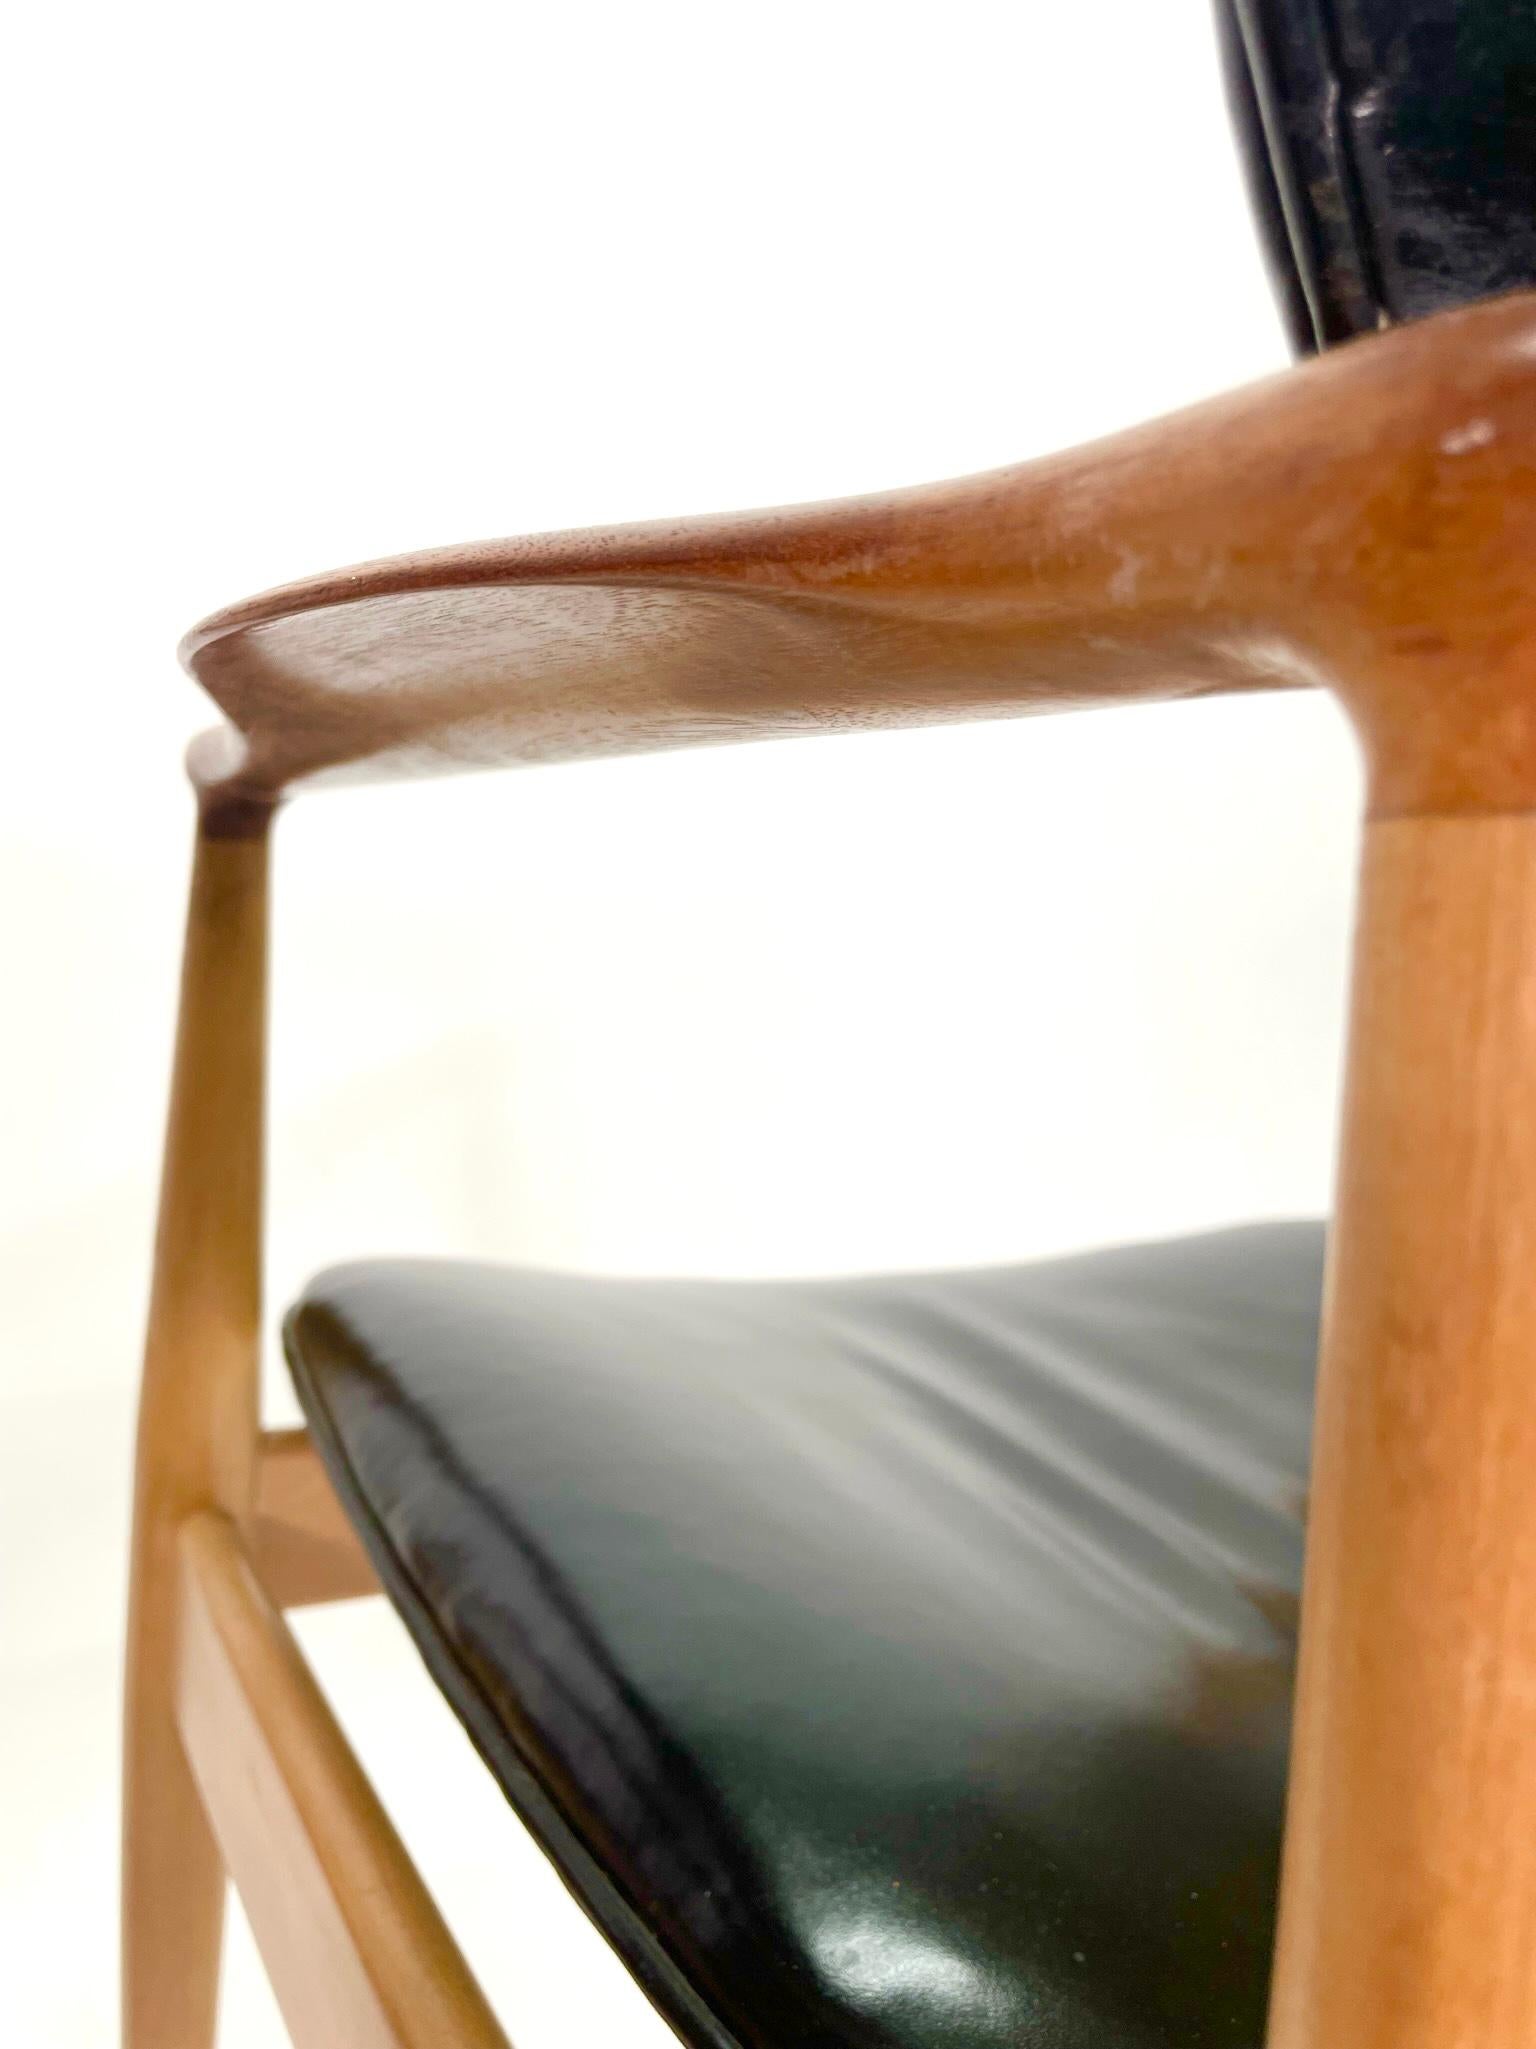 Leather Finn Juhl Model 48 Chair by Baker, in Teak and Maple (2 available)